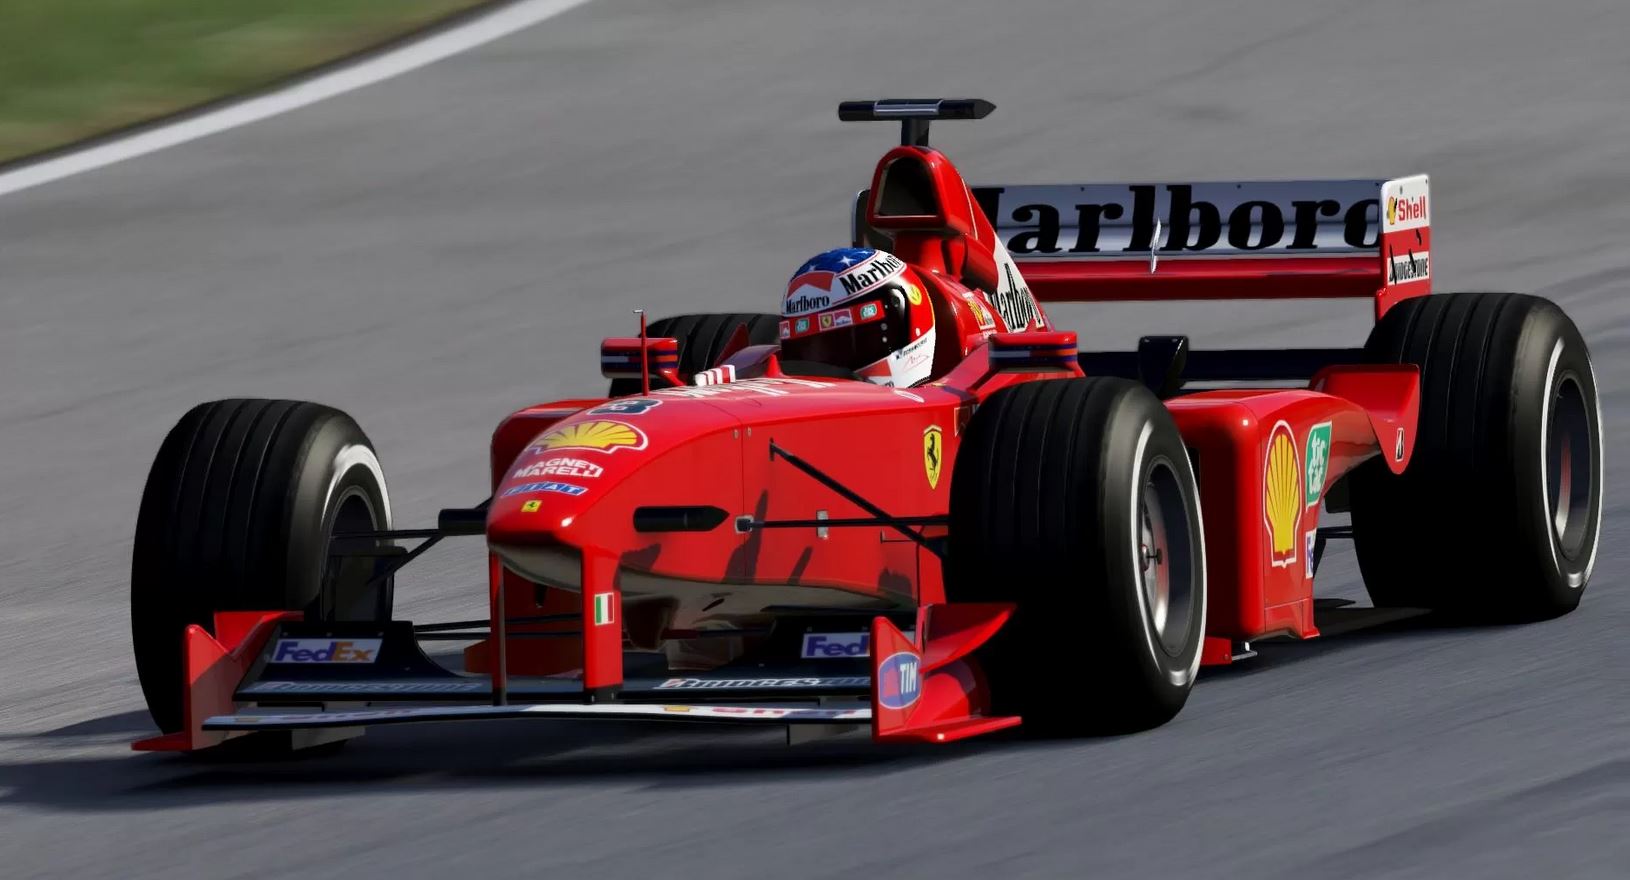 More information about "Ferrari F399 - 1999 by ASR Formula per Assetto Corsa ed rFactor 2"